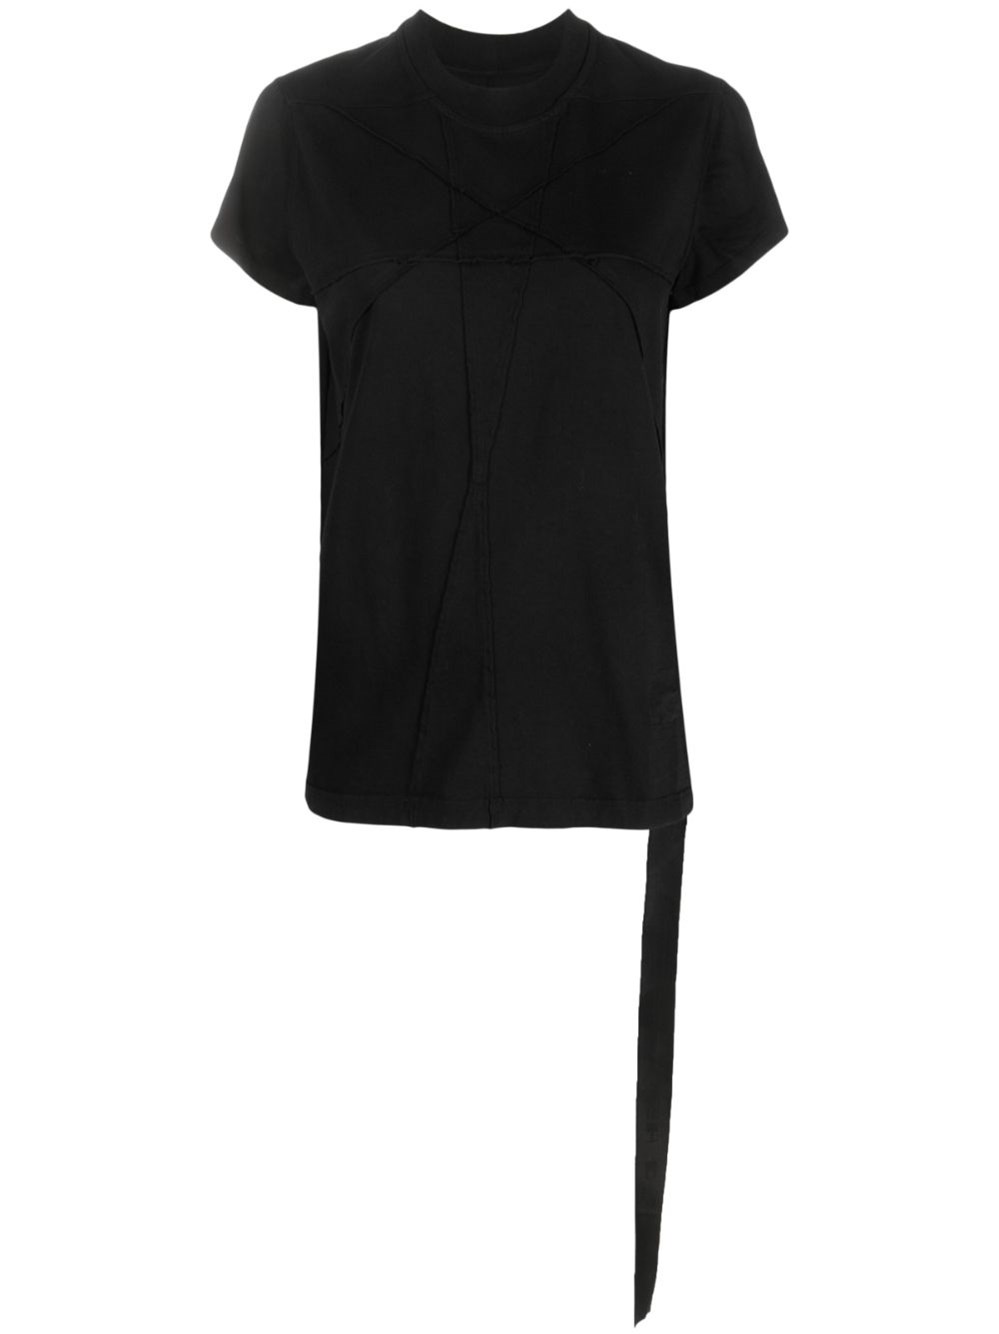 RICK OWENS DRKSHDW COTTON T-SHIRT WITH TONE-ON-TONE STITCHING